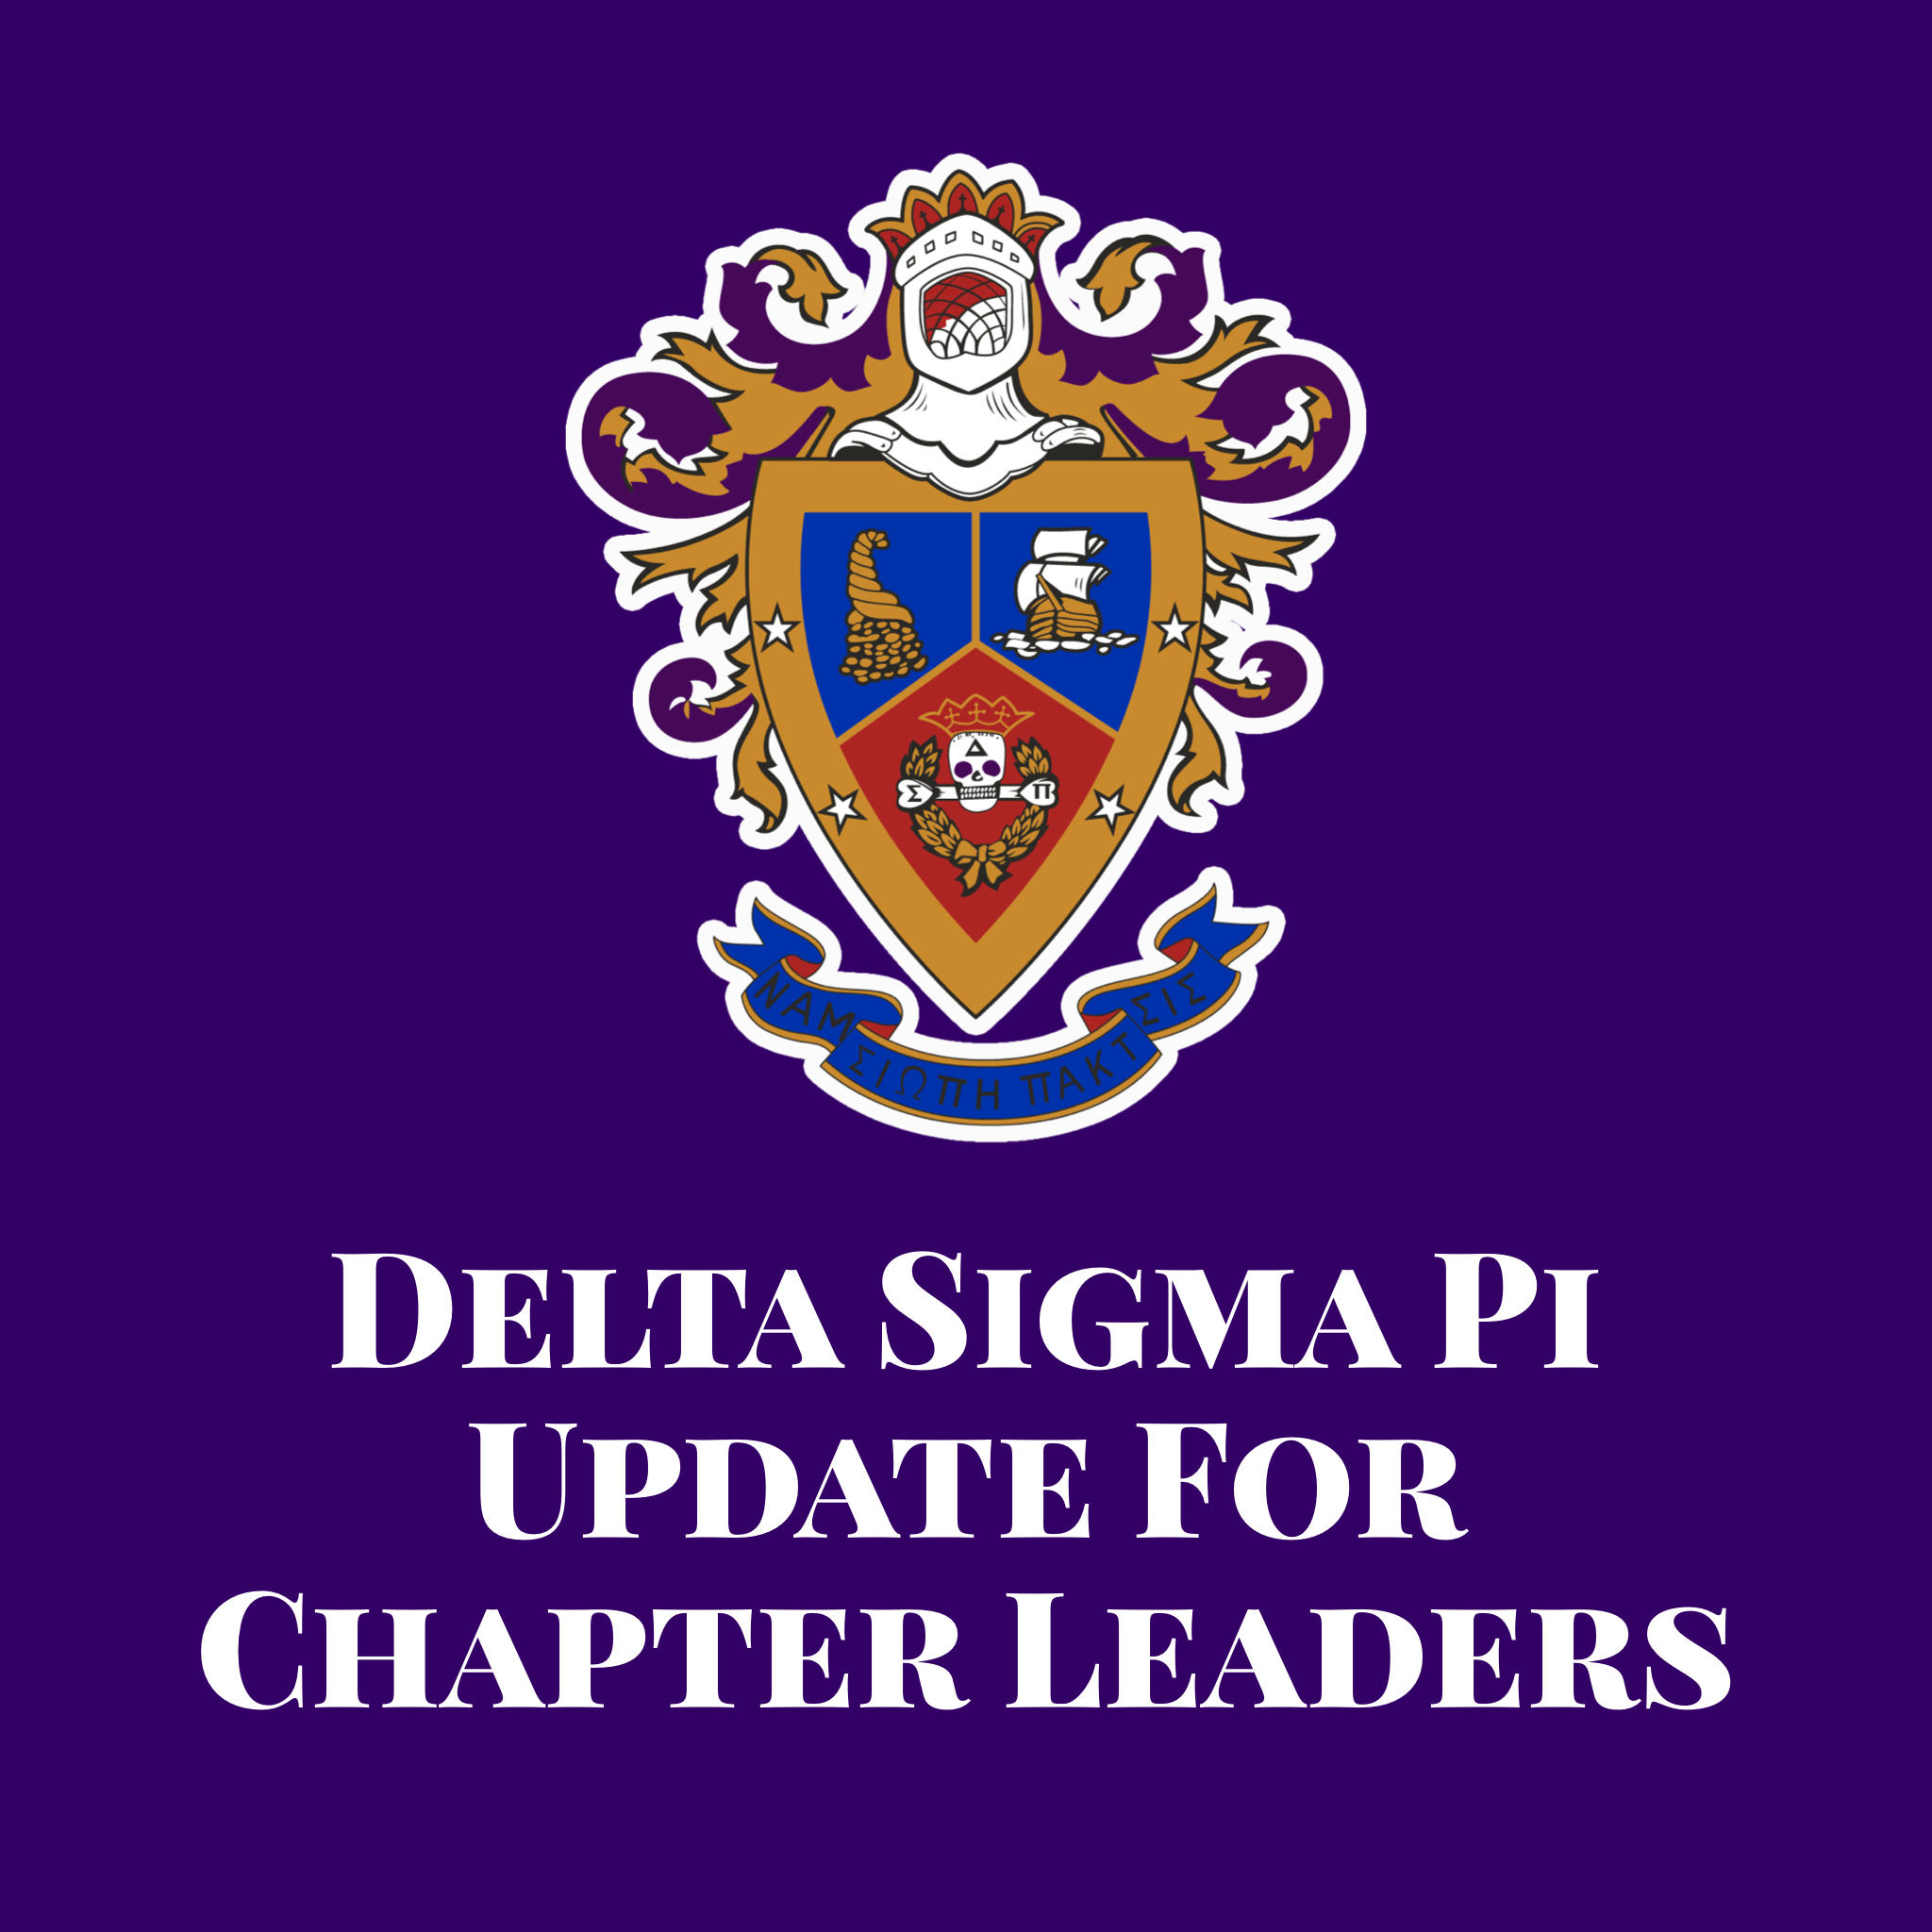 Update for Chapter Leaders